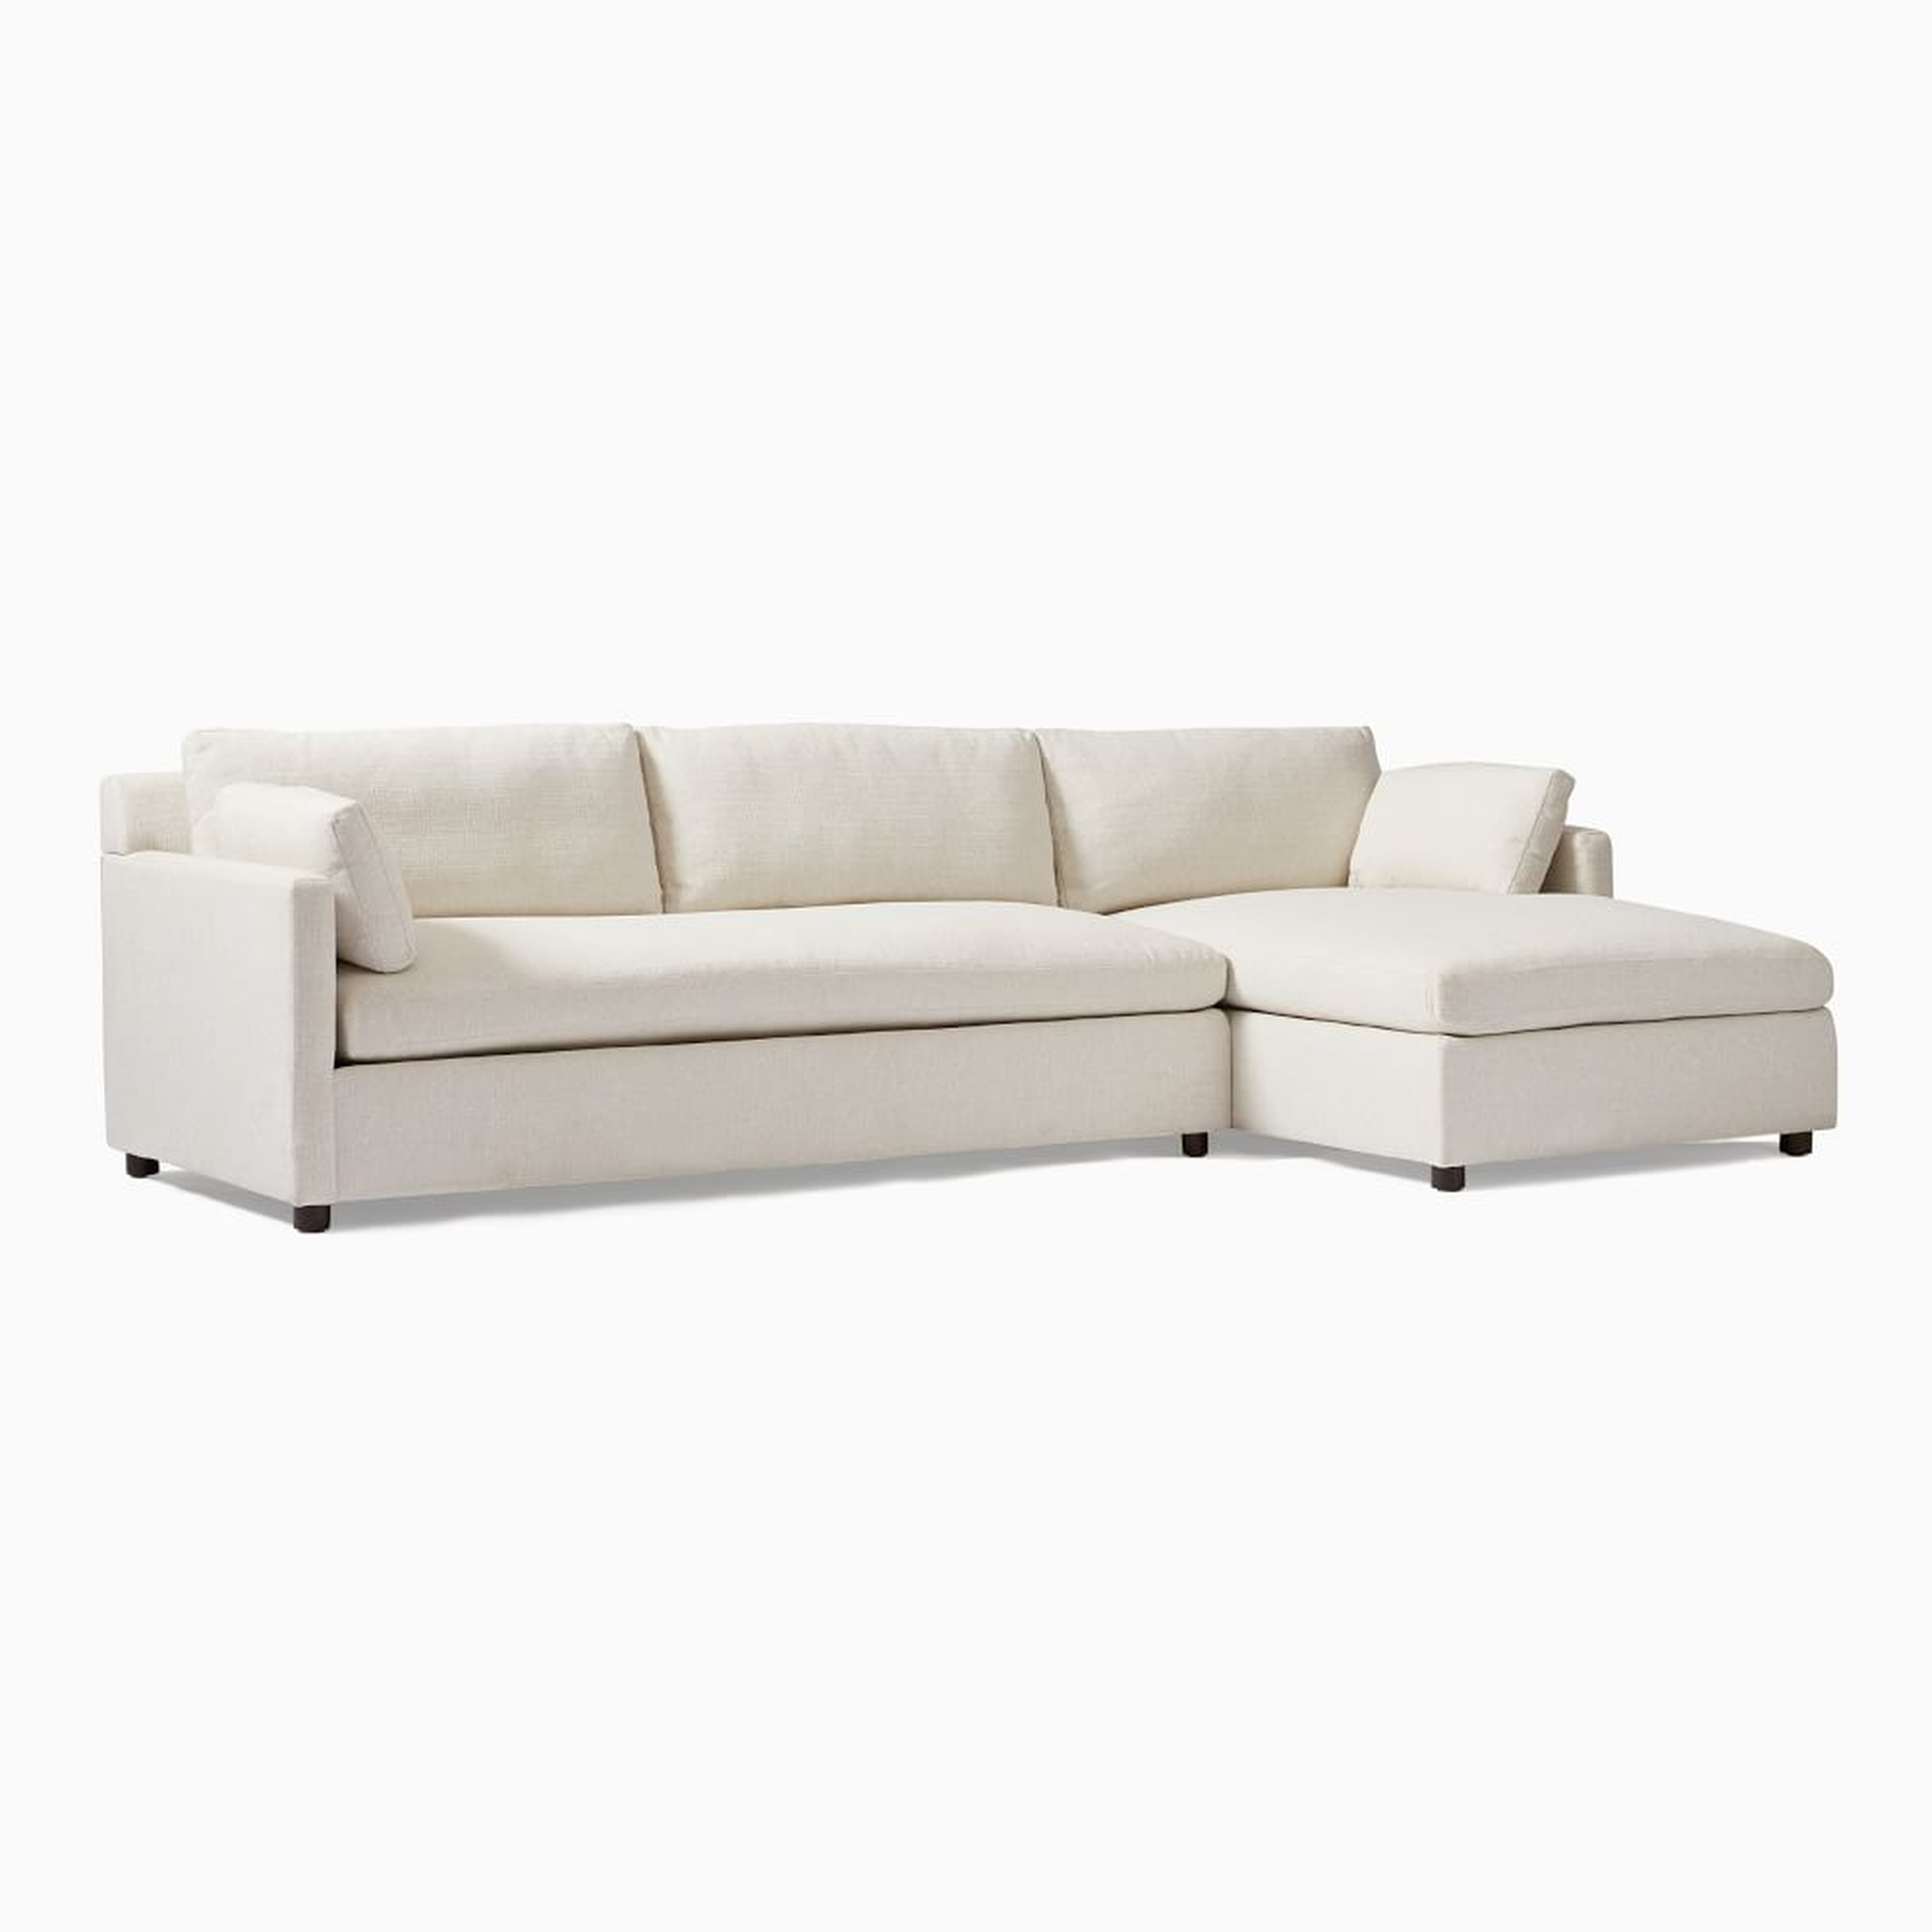 Marin 114" Right 2-Piece Chaise Sectional, Standard Depth, Performance Basketweave, Alabaster - West Elm